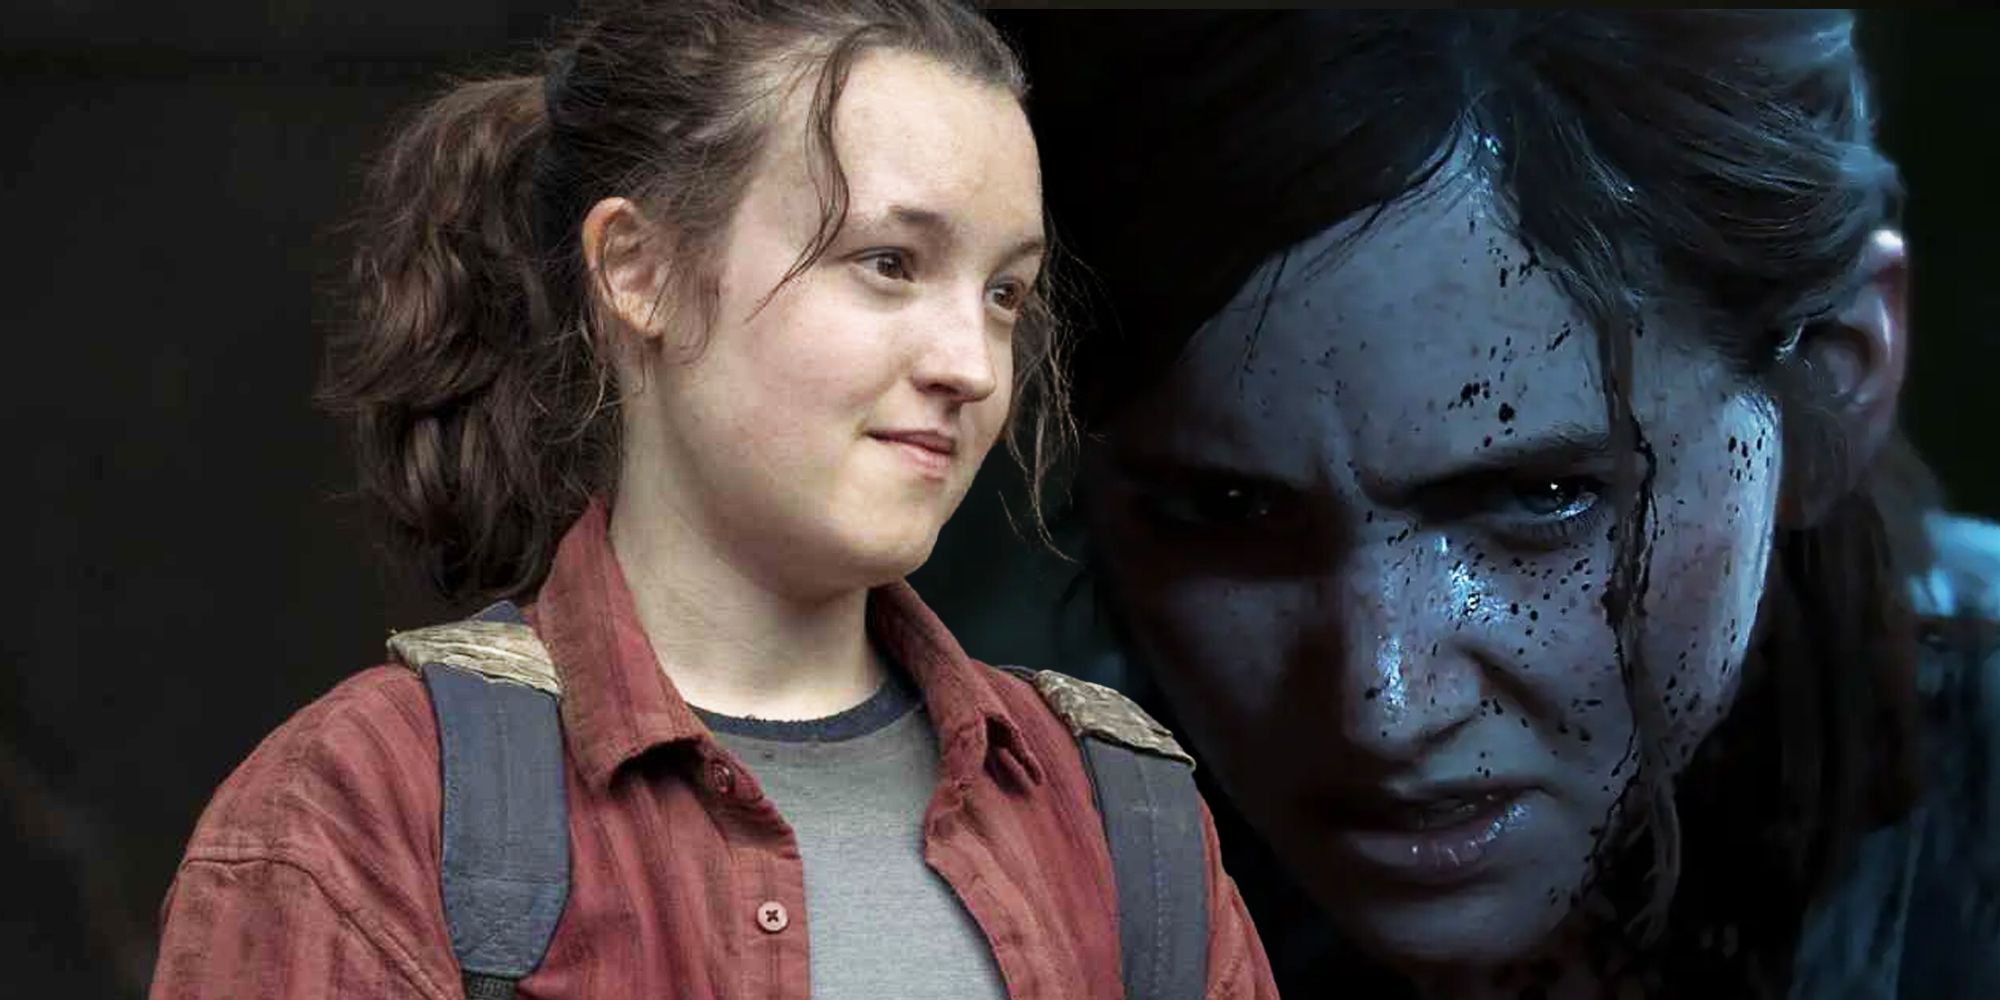 The Last of Us' fans think an important season 2 character had a